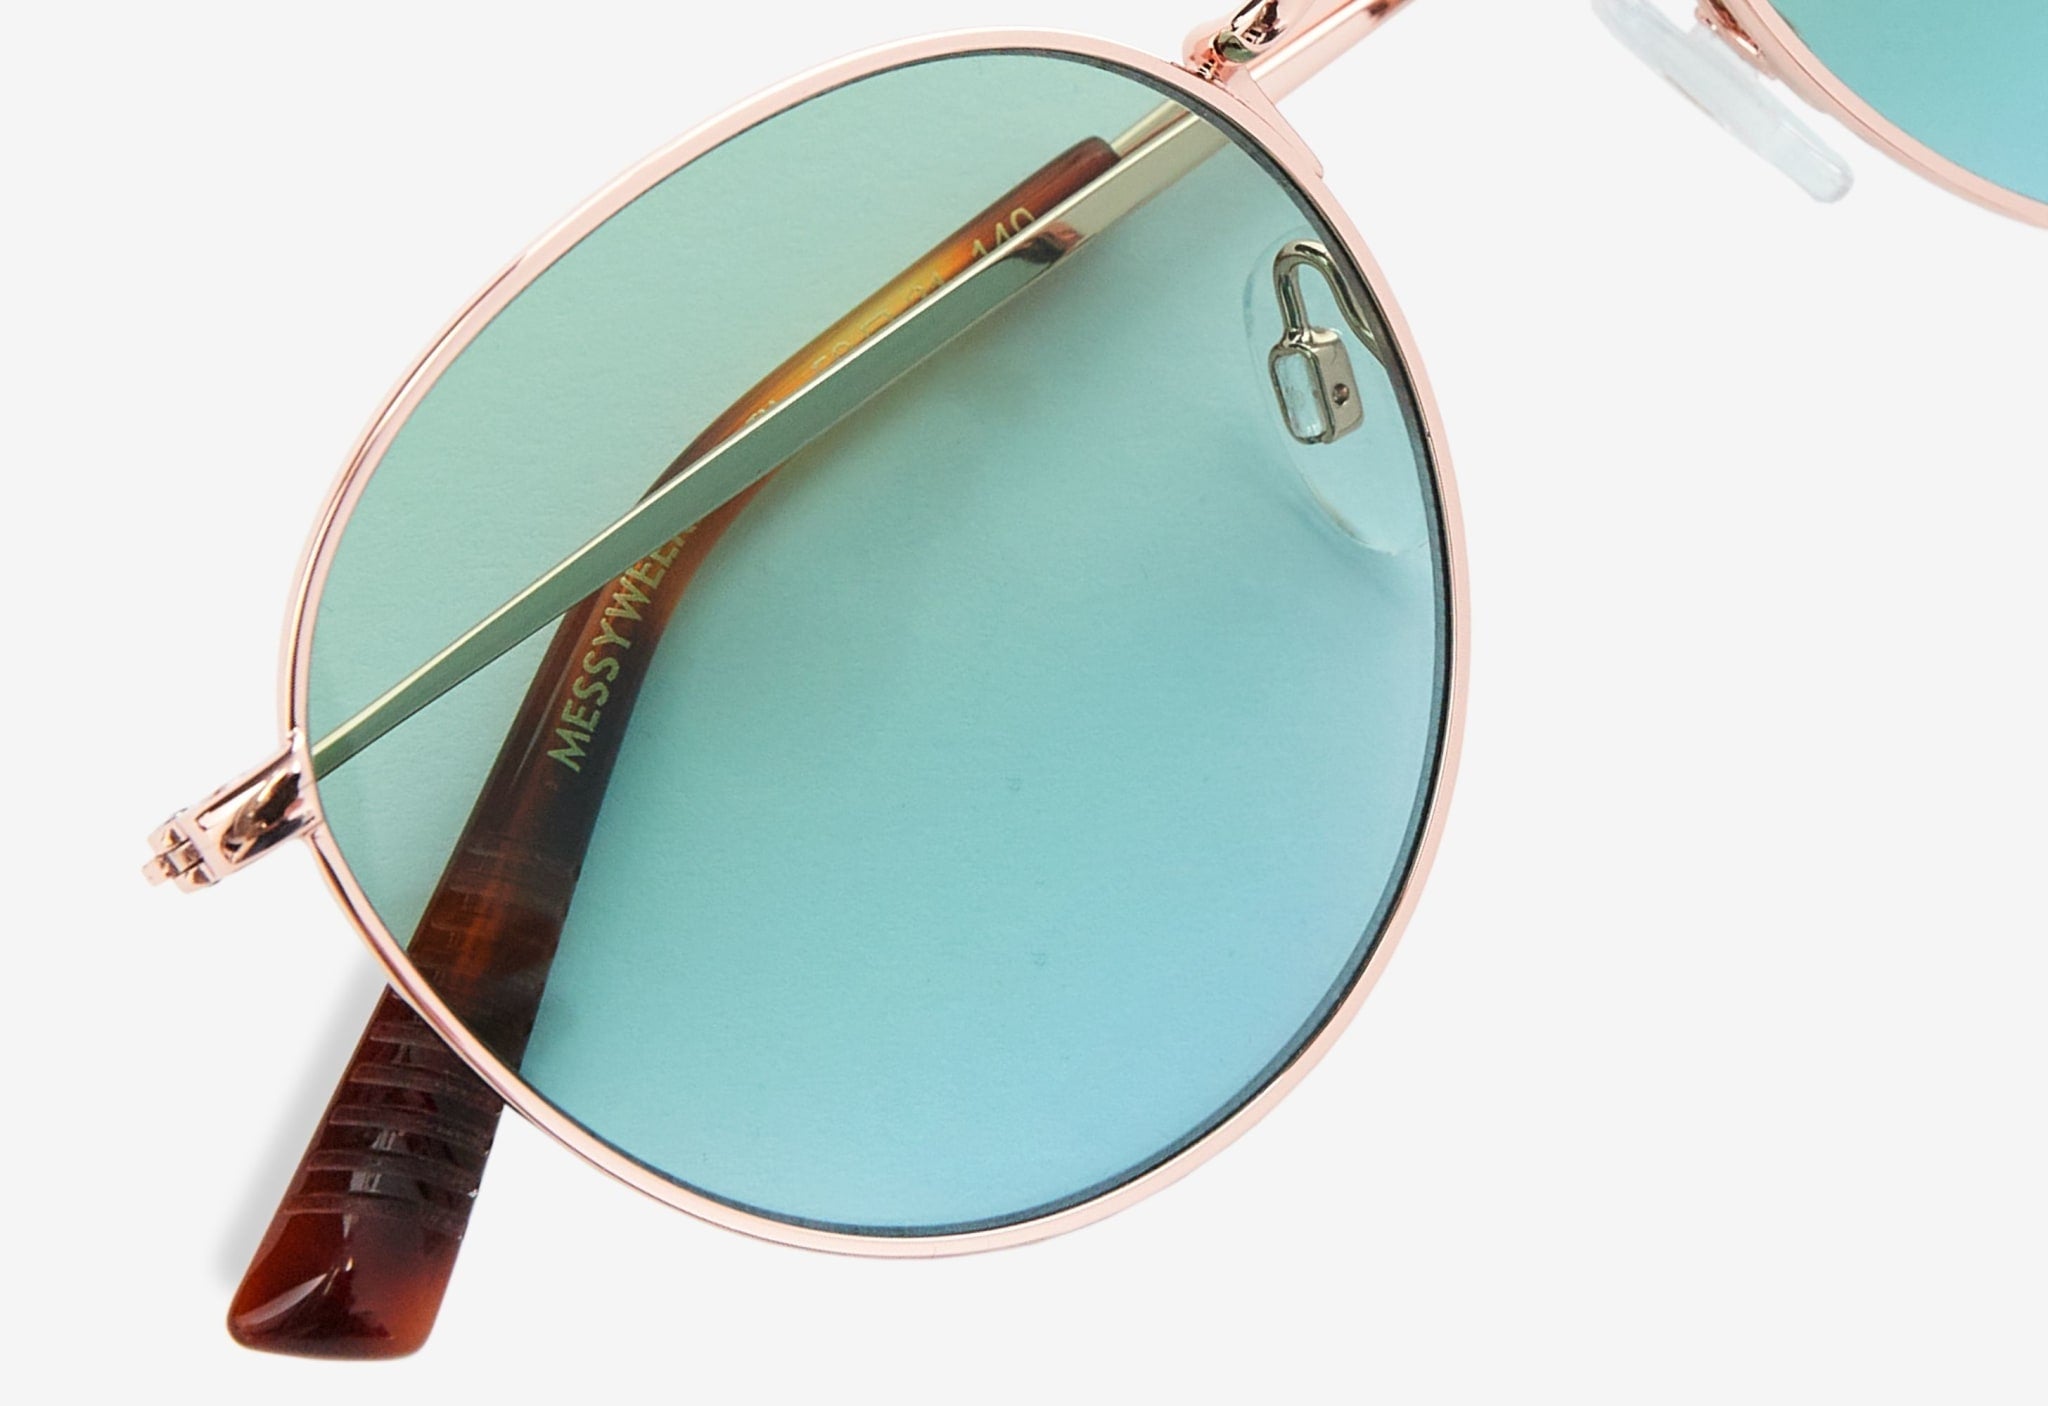 Round metal sunglasses with green lens | MessyWeekend